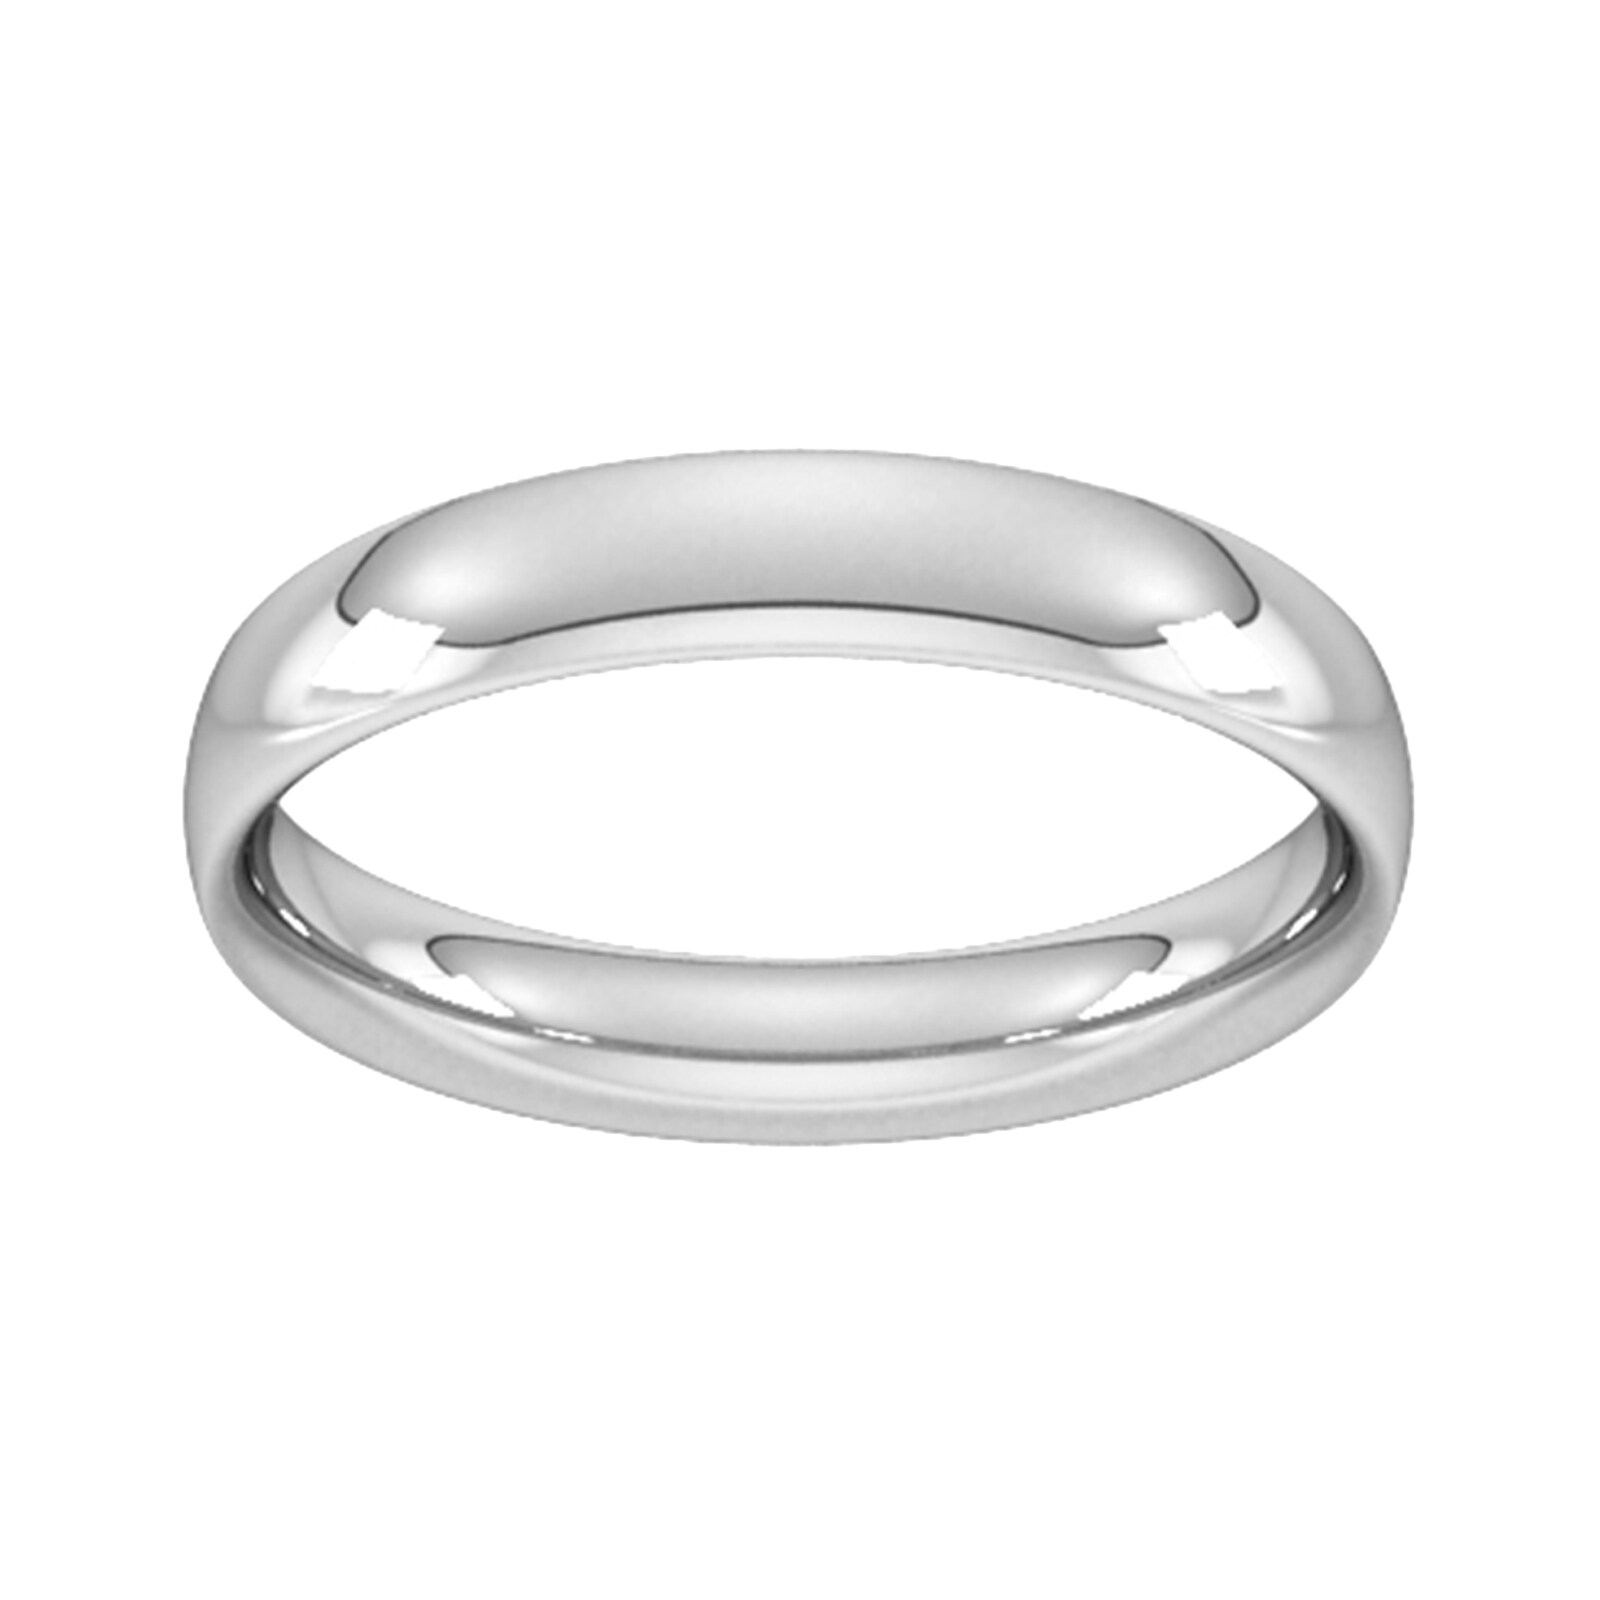 4mm Traditional Court Heavy Wedding Ring In Sterling Silver - Ring Size Q